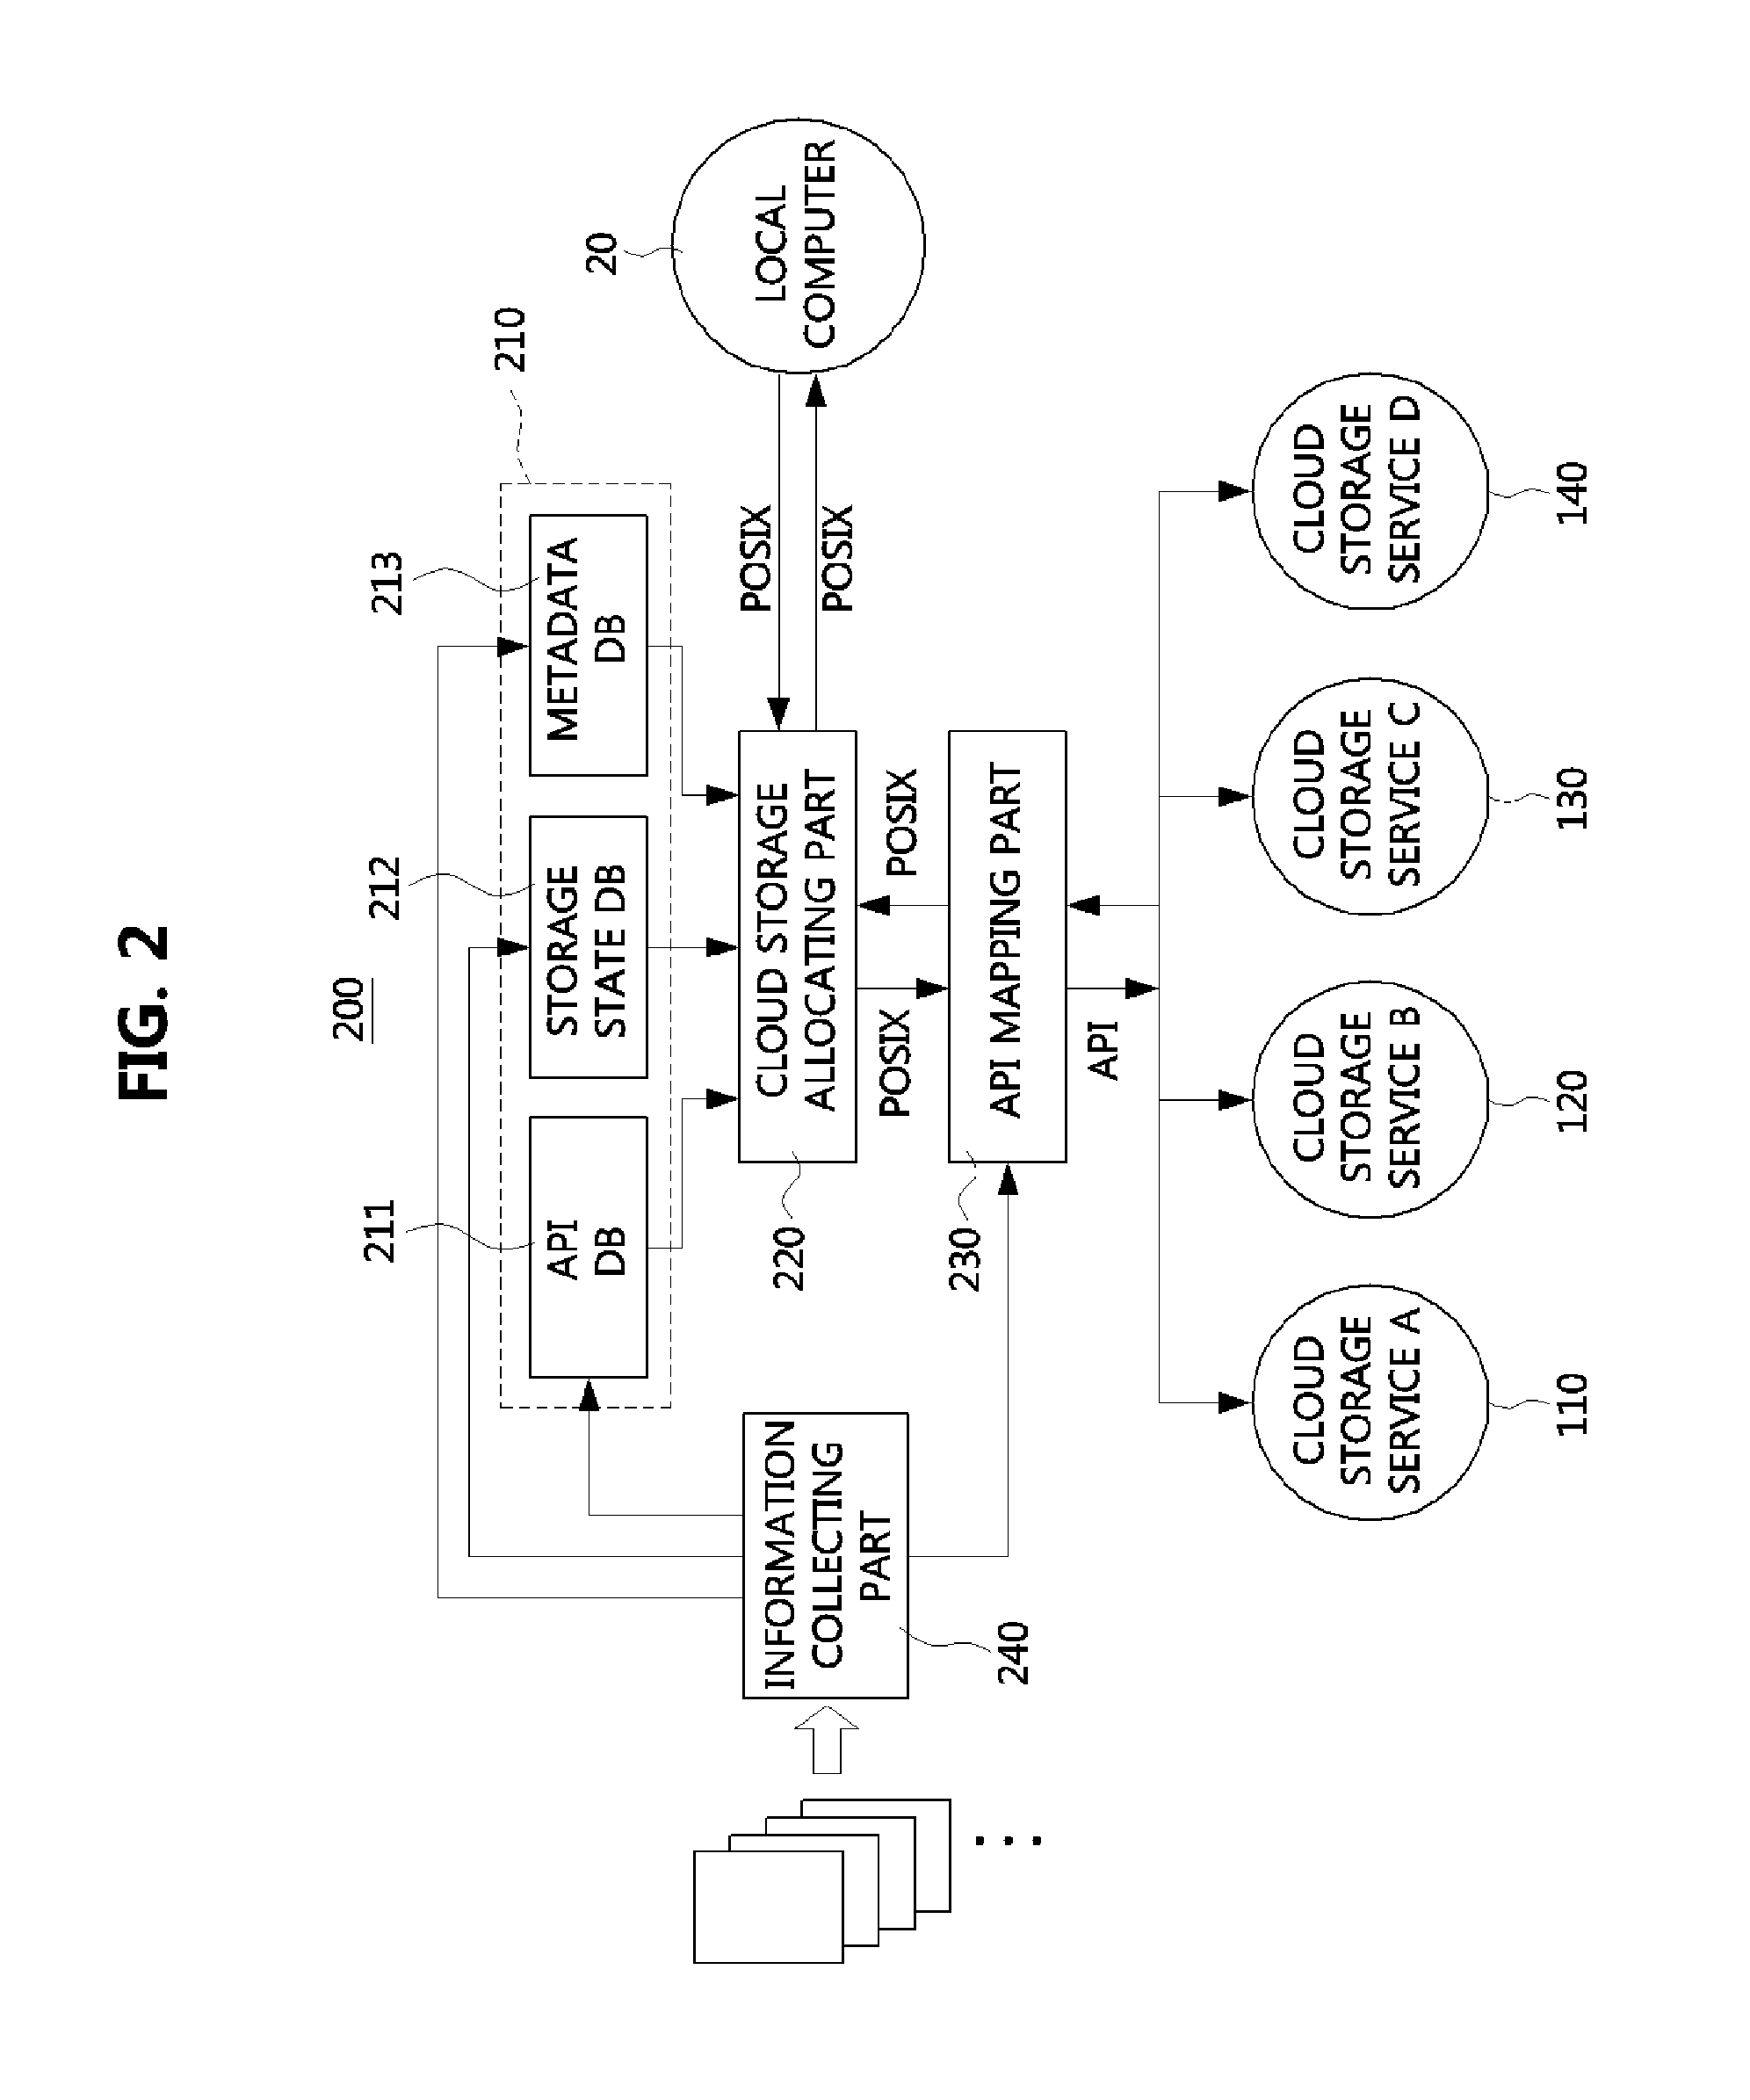 Virtual file system integrating multiple cloud storage services and operating method of the same